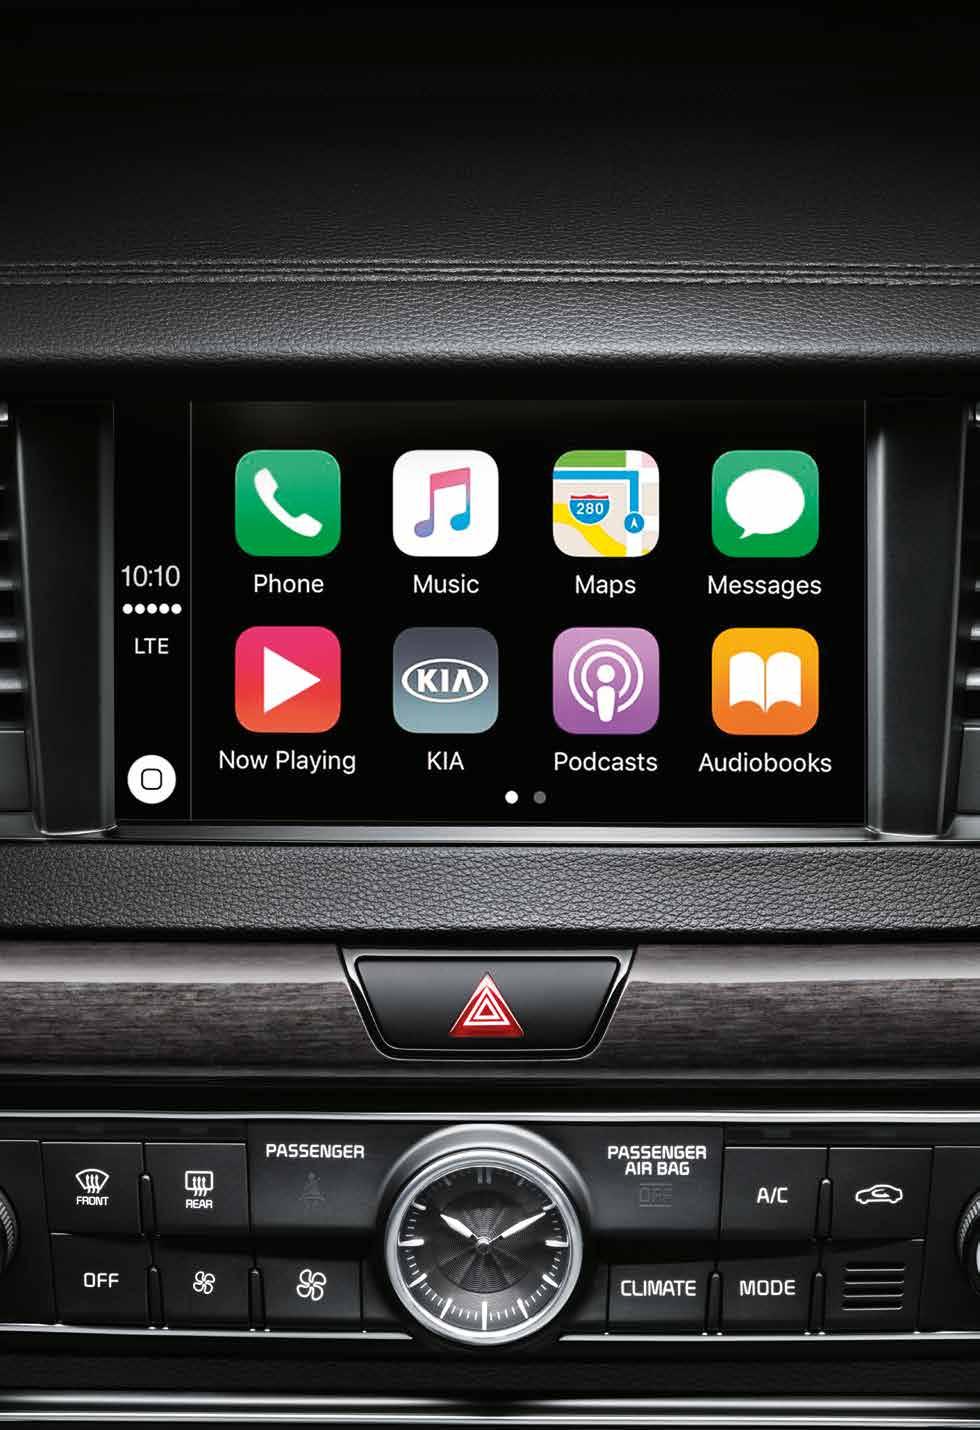 KIA.CA/CADENZA CONNECTIVITY Always stay CONNECTED through your favourite device Use Apple CarPlay and Android Auto TM smartphone voice commands to send and receive messages,